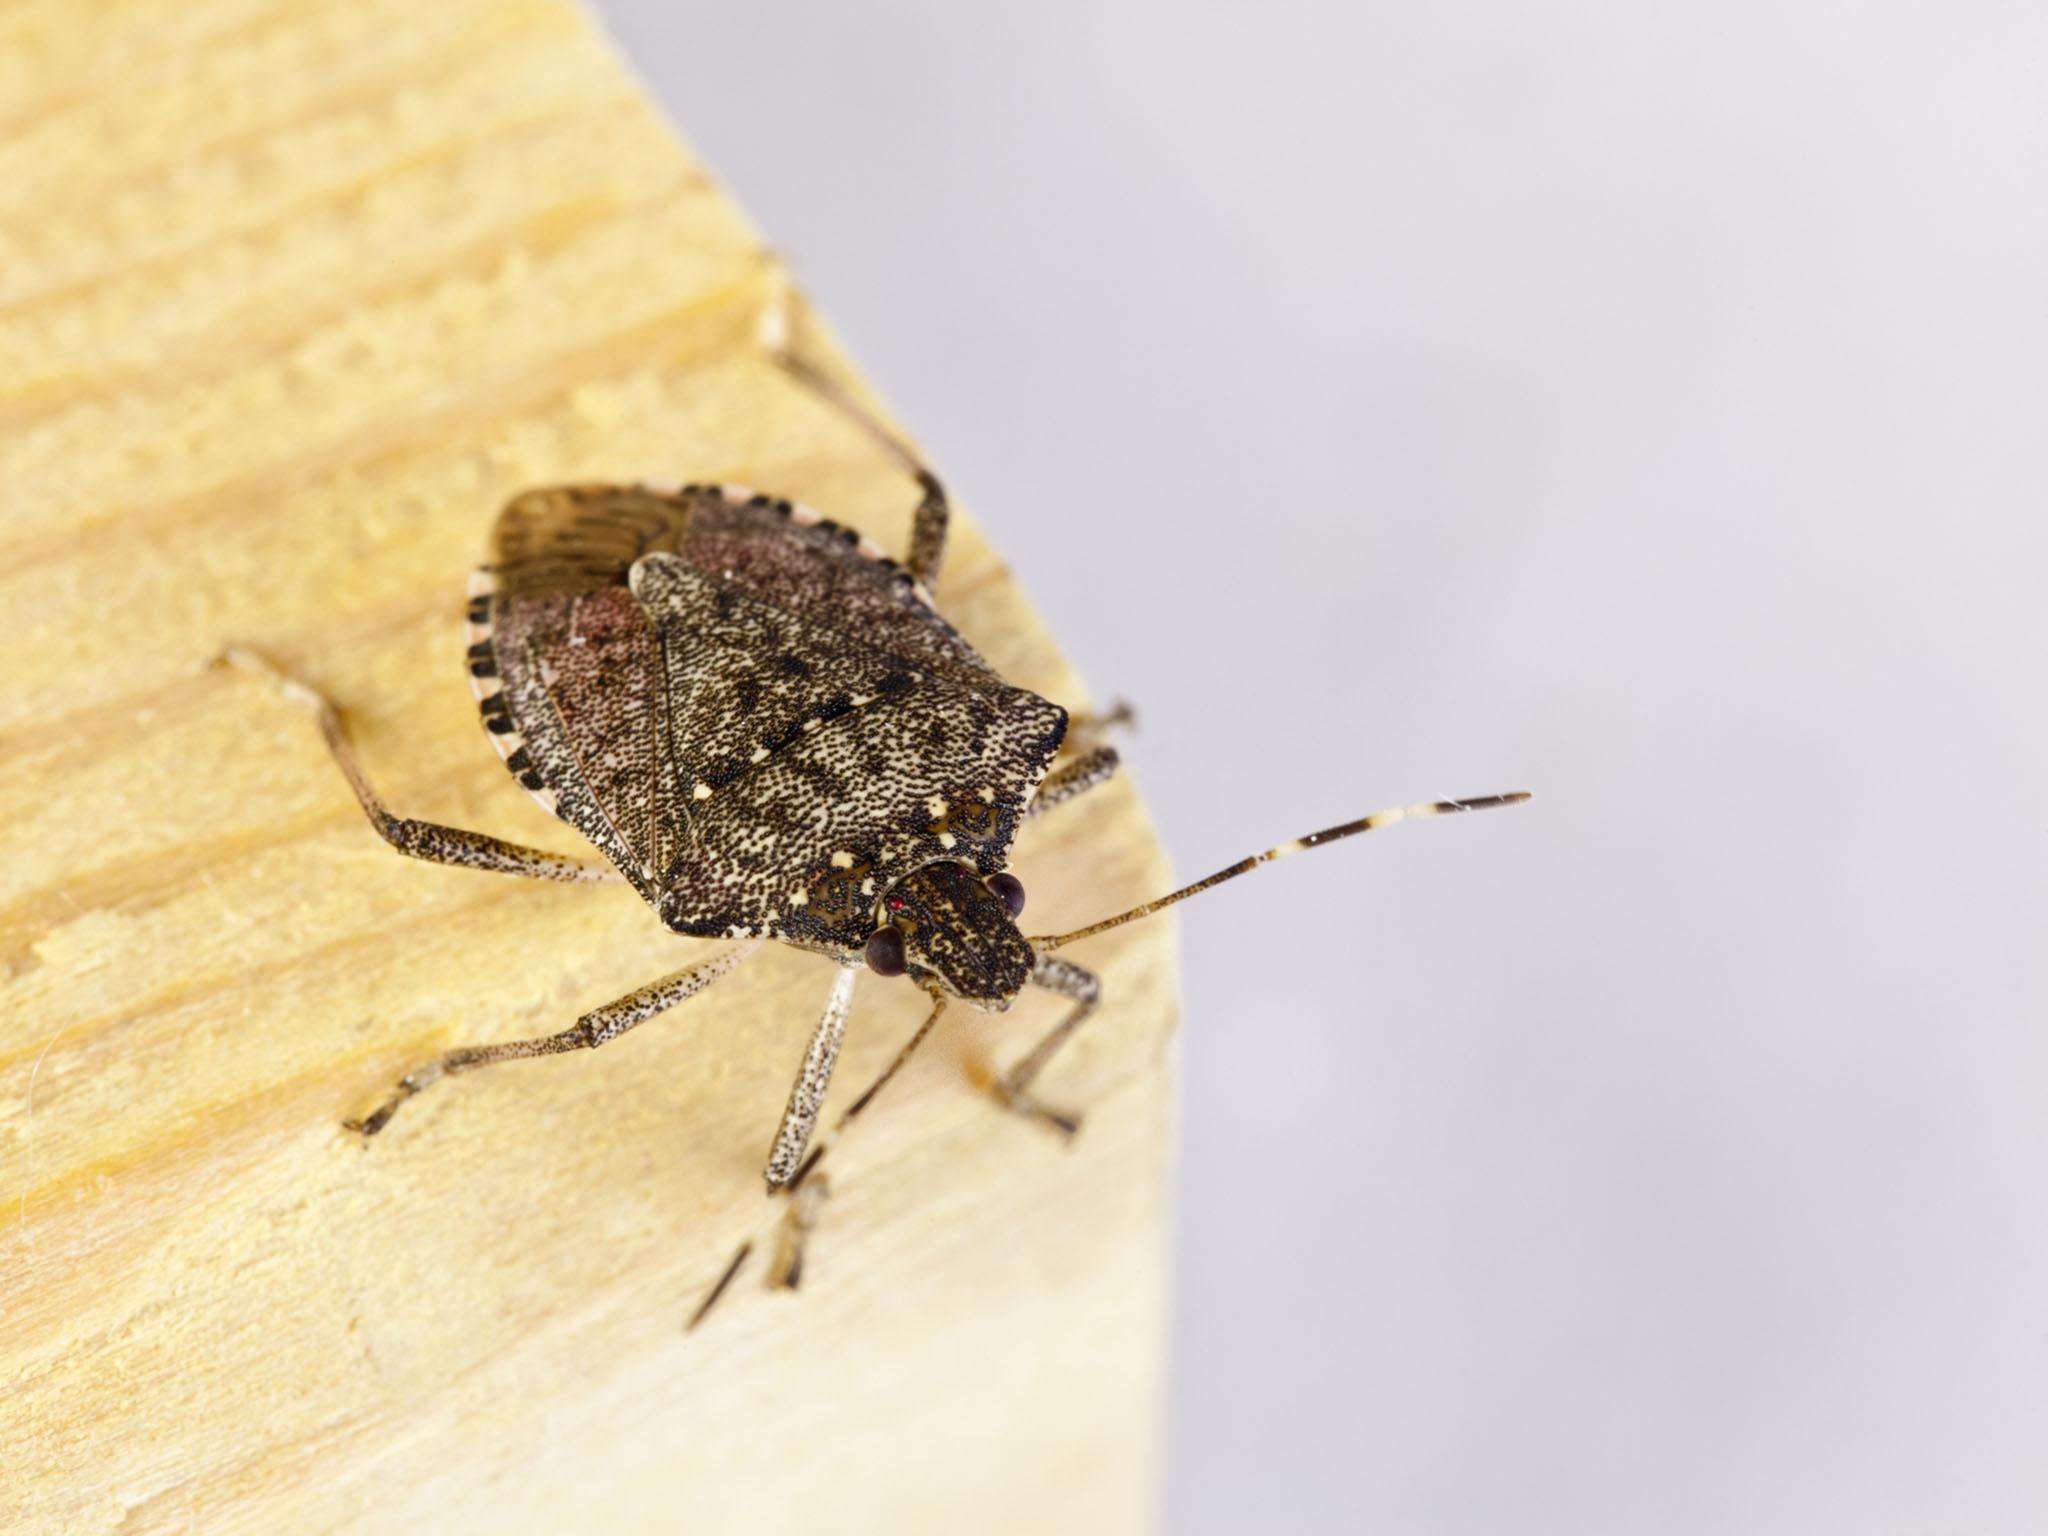 Six generations of the brown marmorated stink bug can be born within a single year